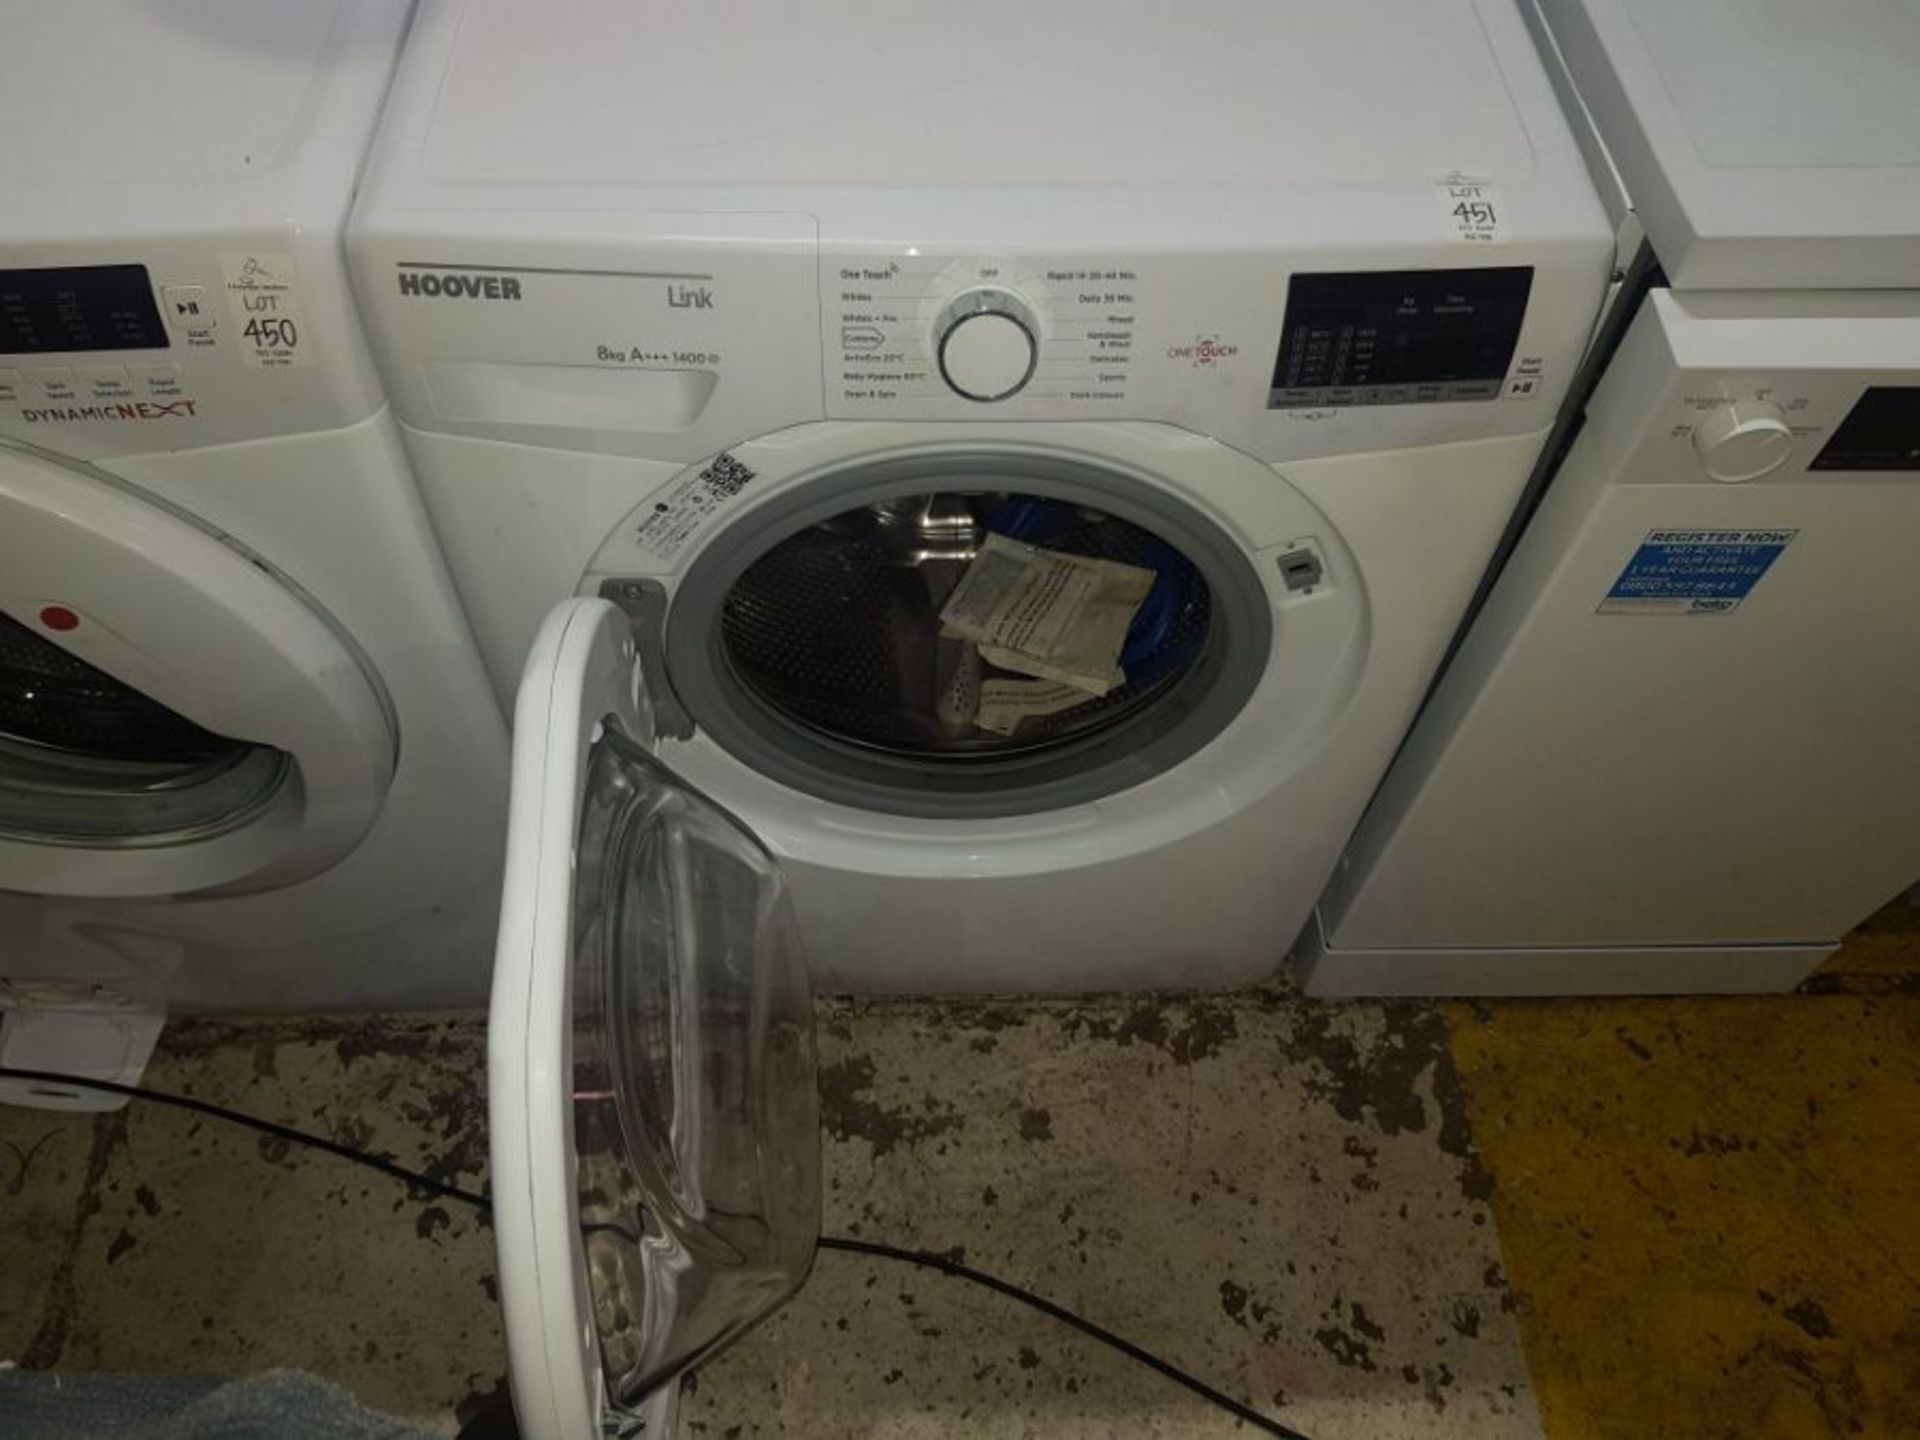 HOOVER LINK 8KG 1400RPM WASHING MACHINE (VAT TO BE ADDED TO HAMMER PRICE) - Image 4 of 4